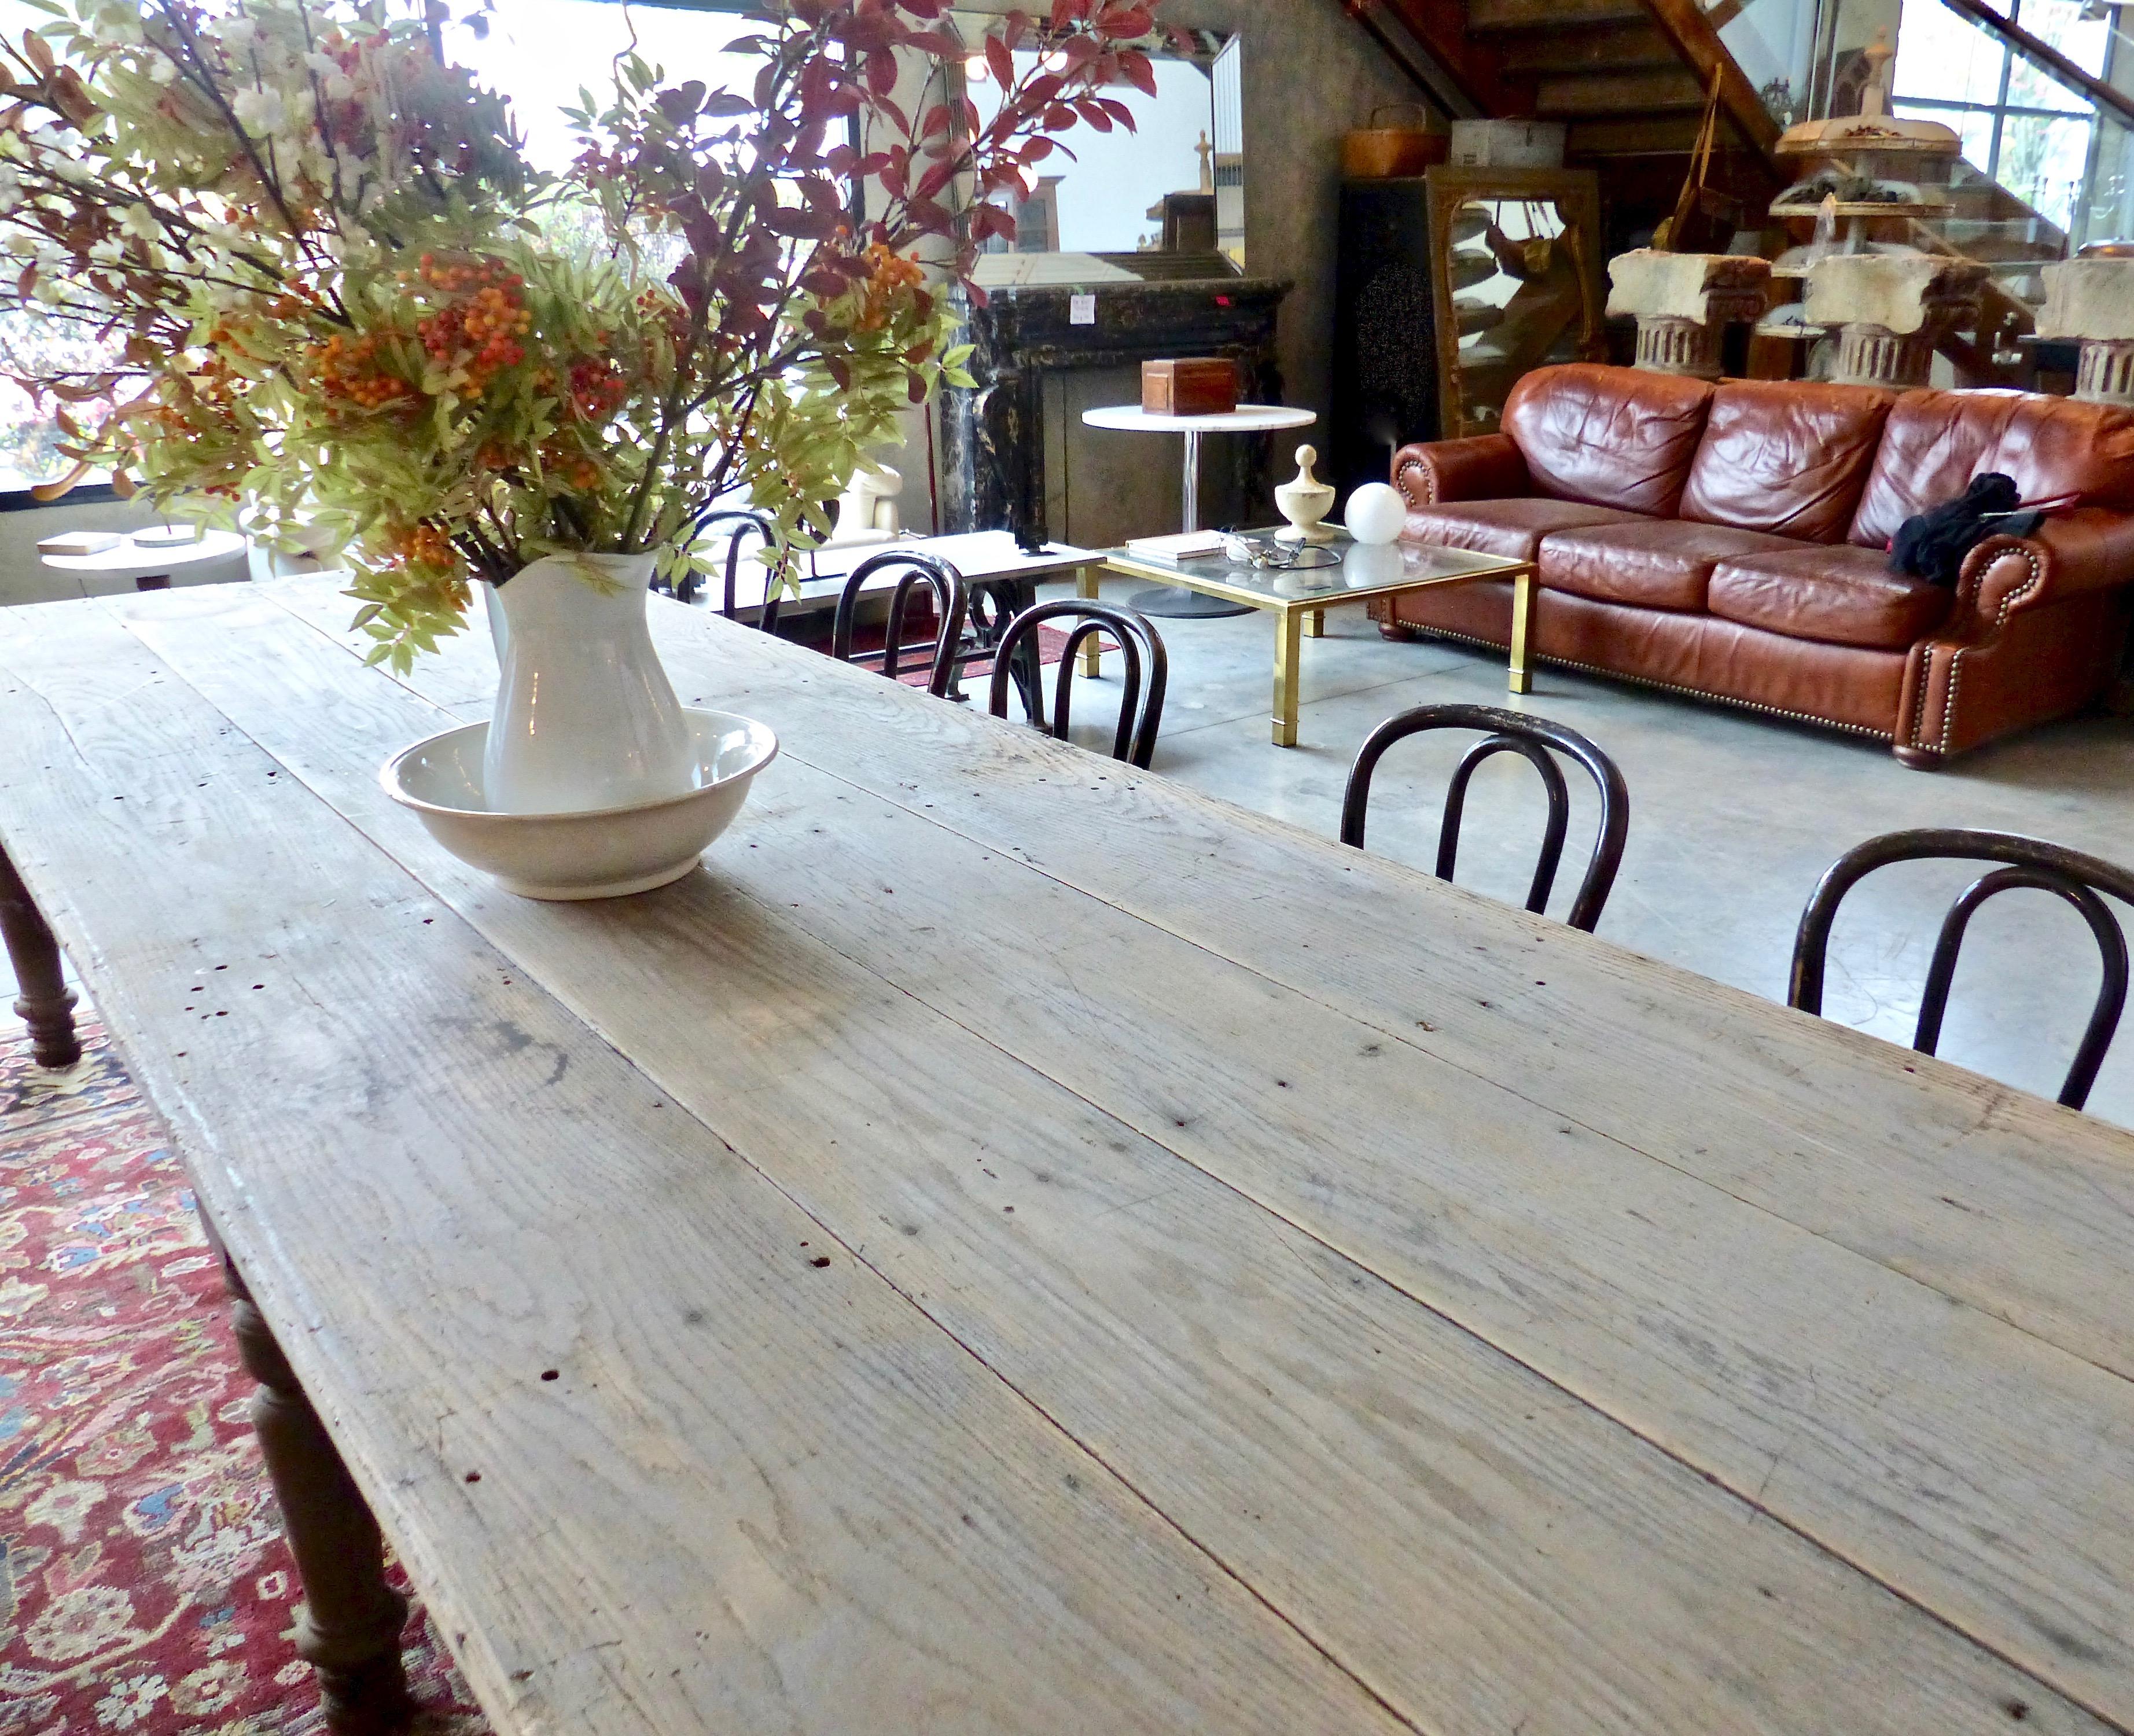 This piece was found in an old general store in rural Ontario. Retains some old grey paint and oxidized surface. The height is ideal for dining as well with lots of room in the skirt to floor. A truly authentic table.
Dimensions: 30 H